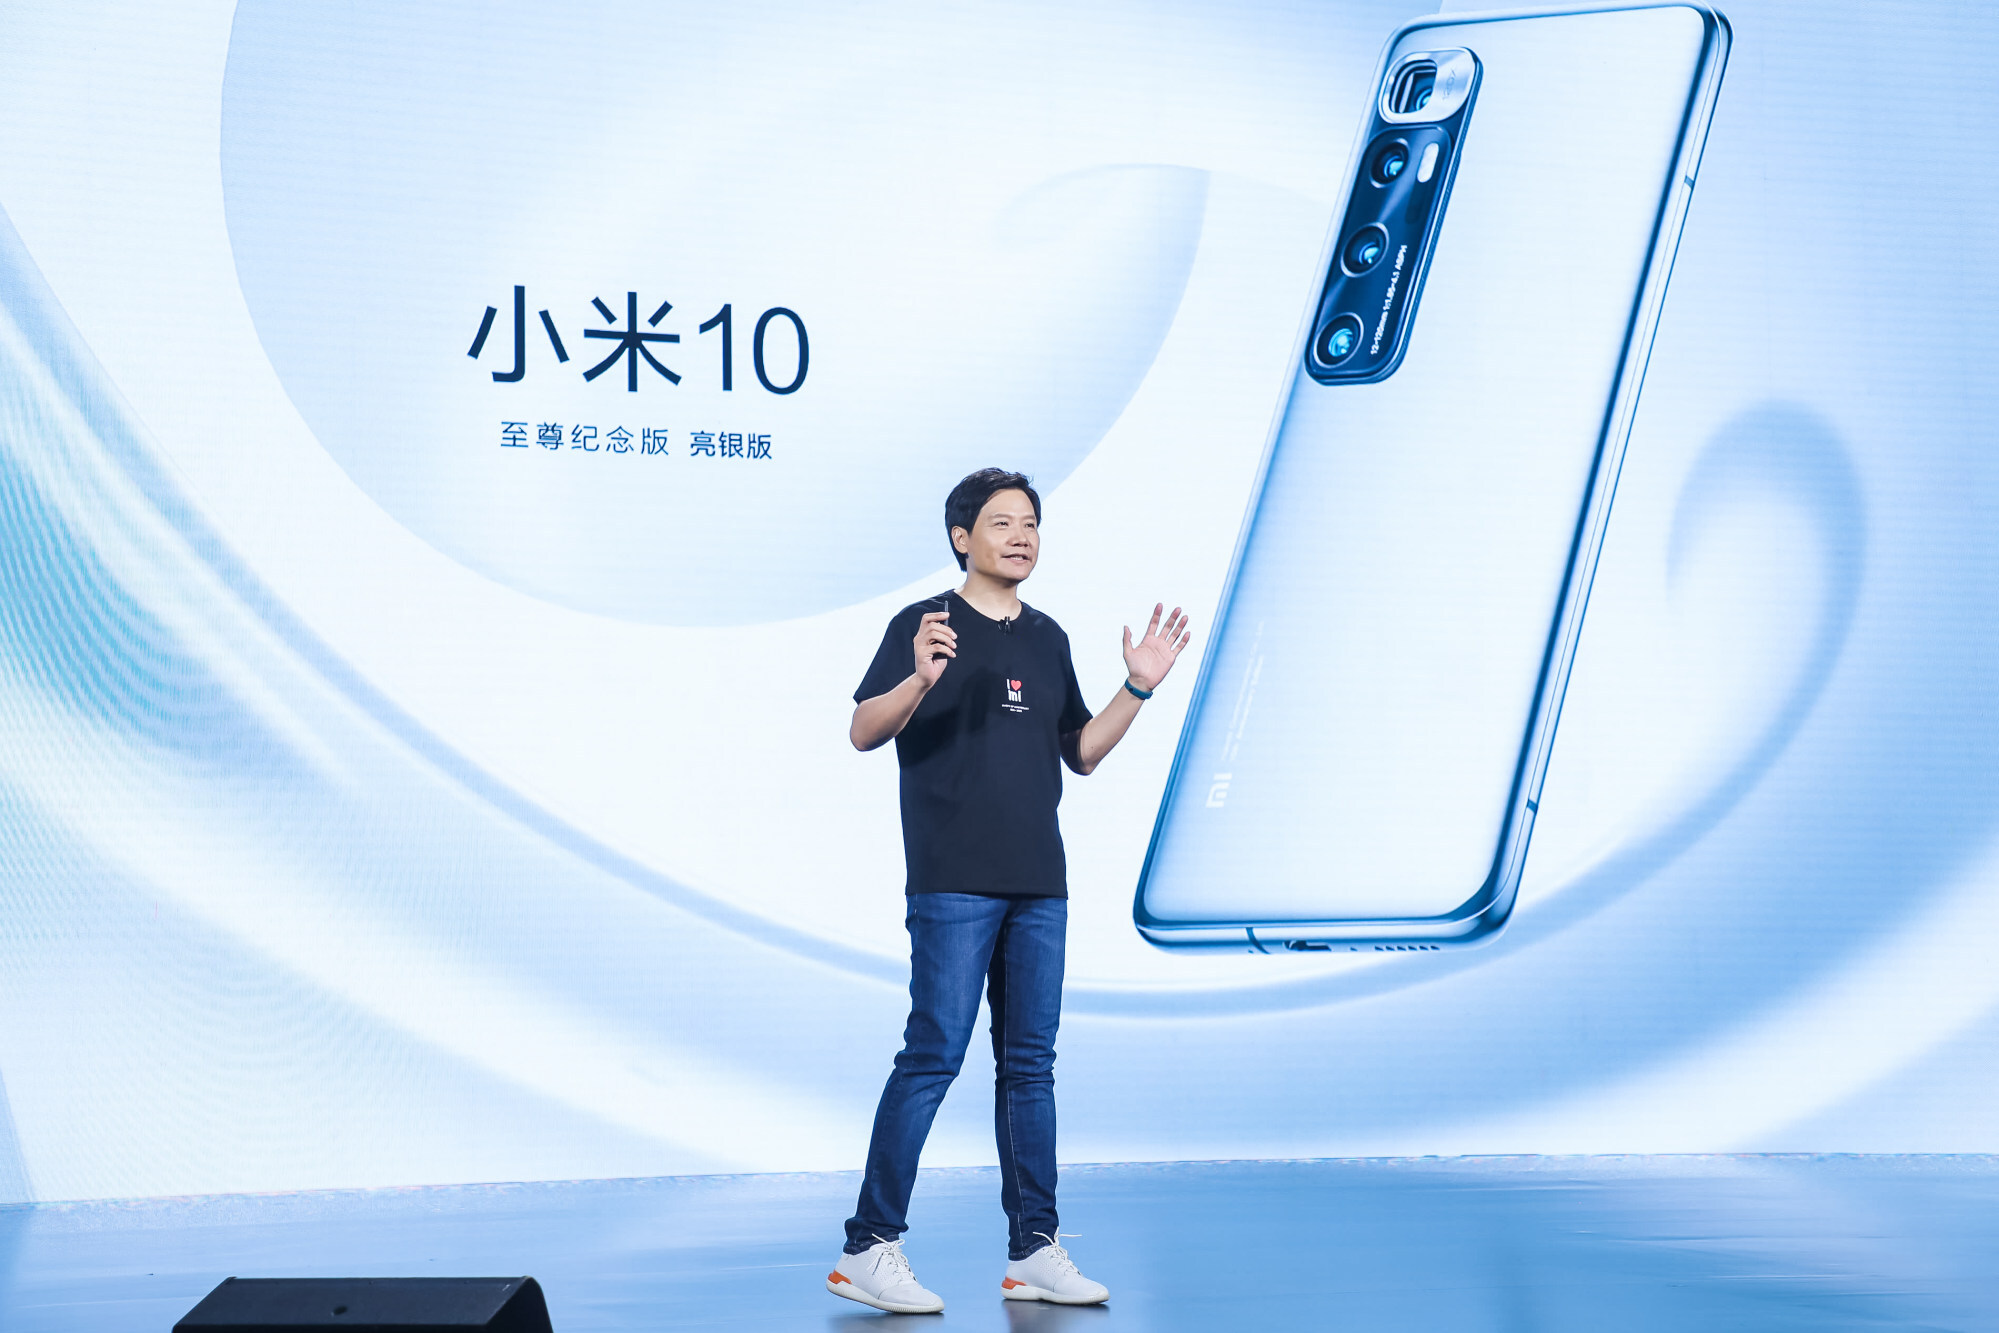 Xiaomi CEO Lei Jun gives a public speech for Xiaomi’s 10th anniversary on August 11, 2020, in Beijing. Photo: Getty Images